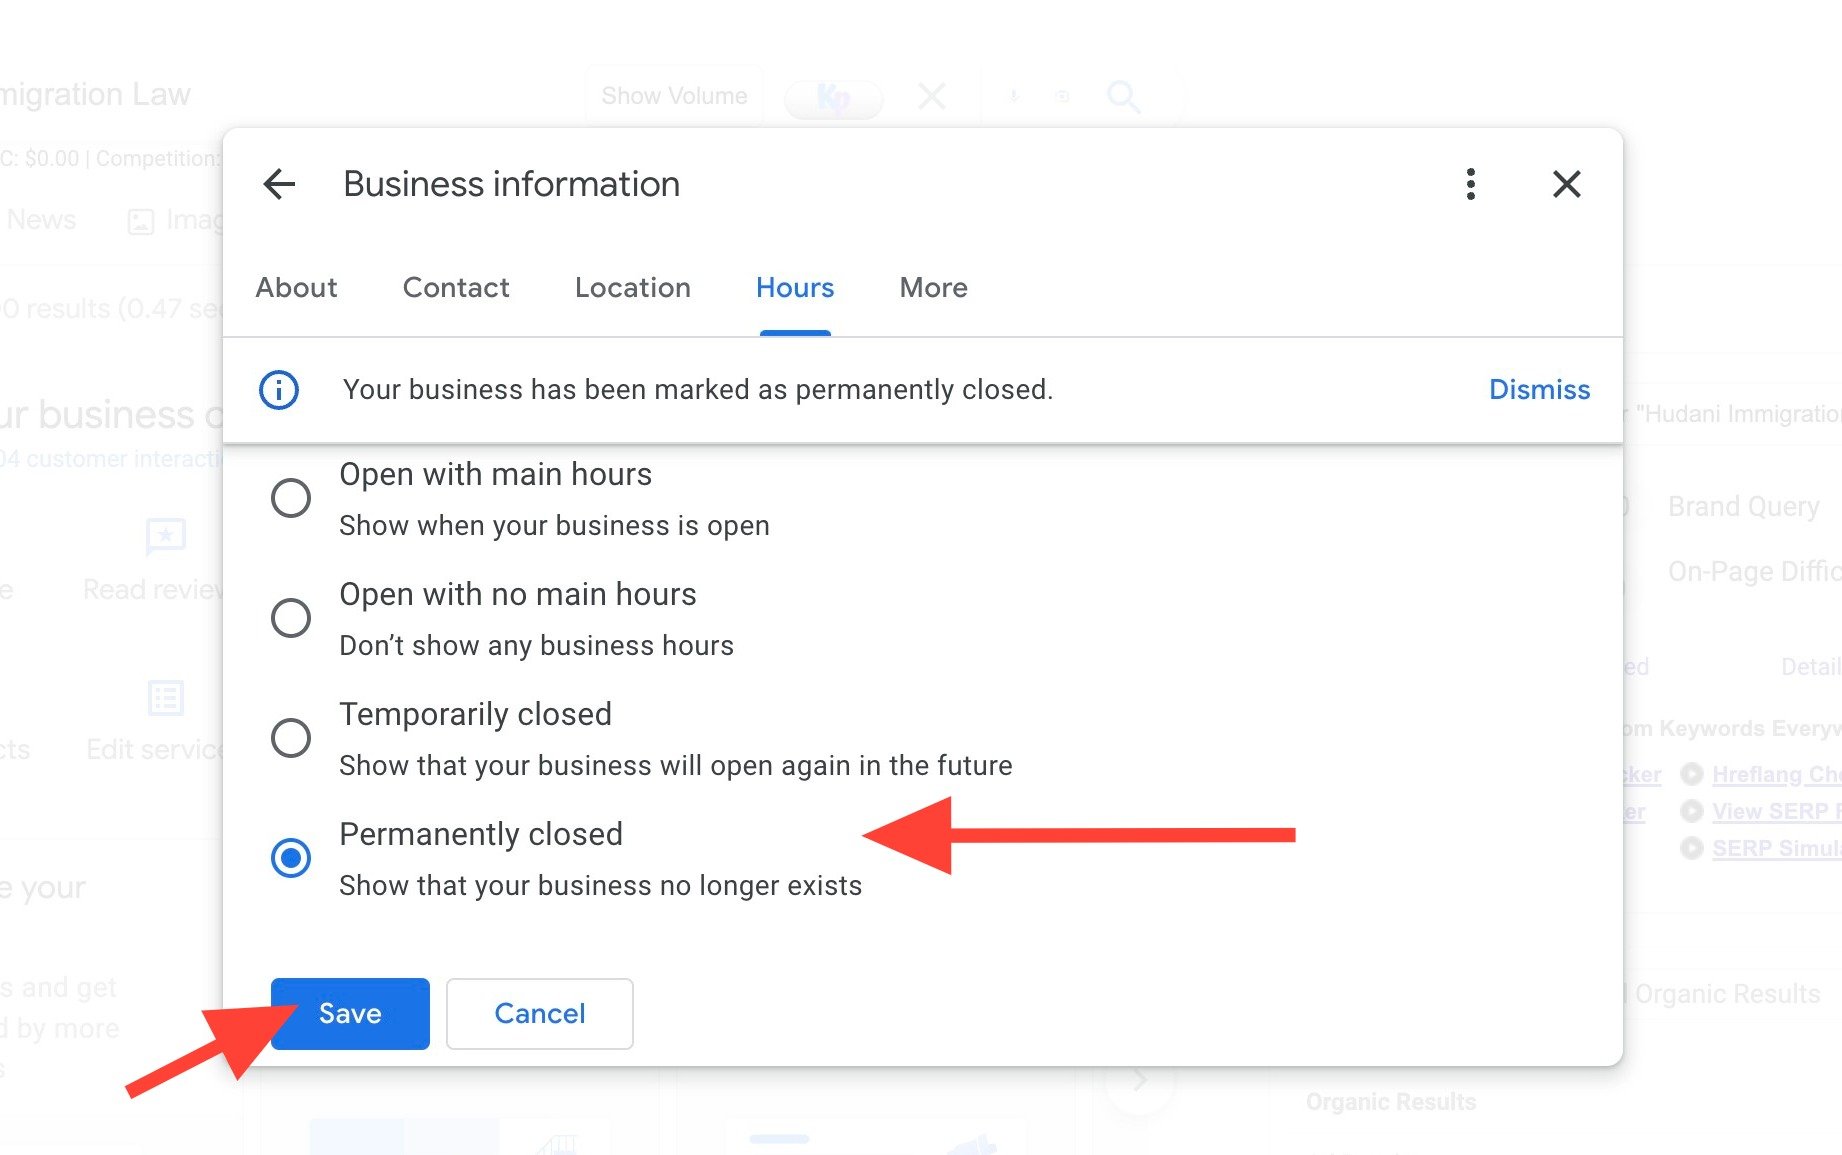 How To Remove A Business From Google Maps How to Remove a Business from Google Maps in 6 Simple Steps